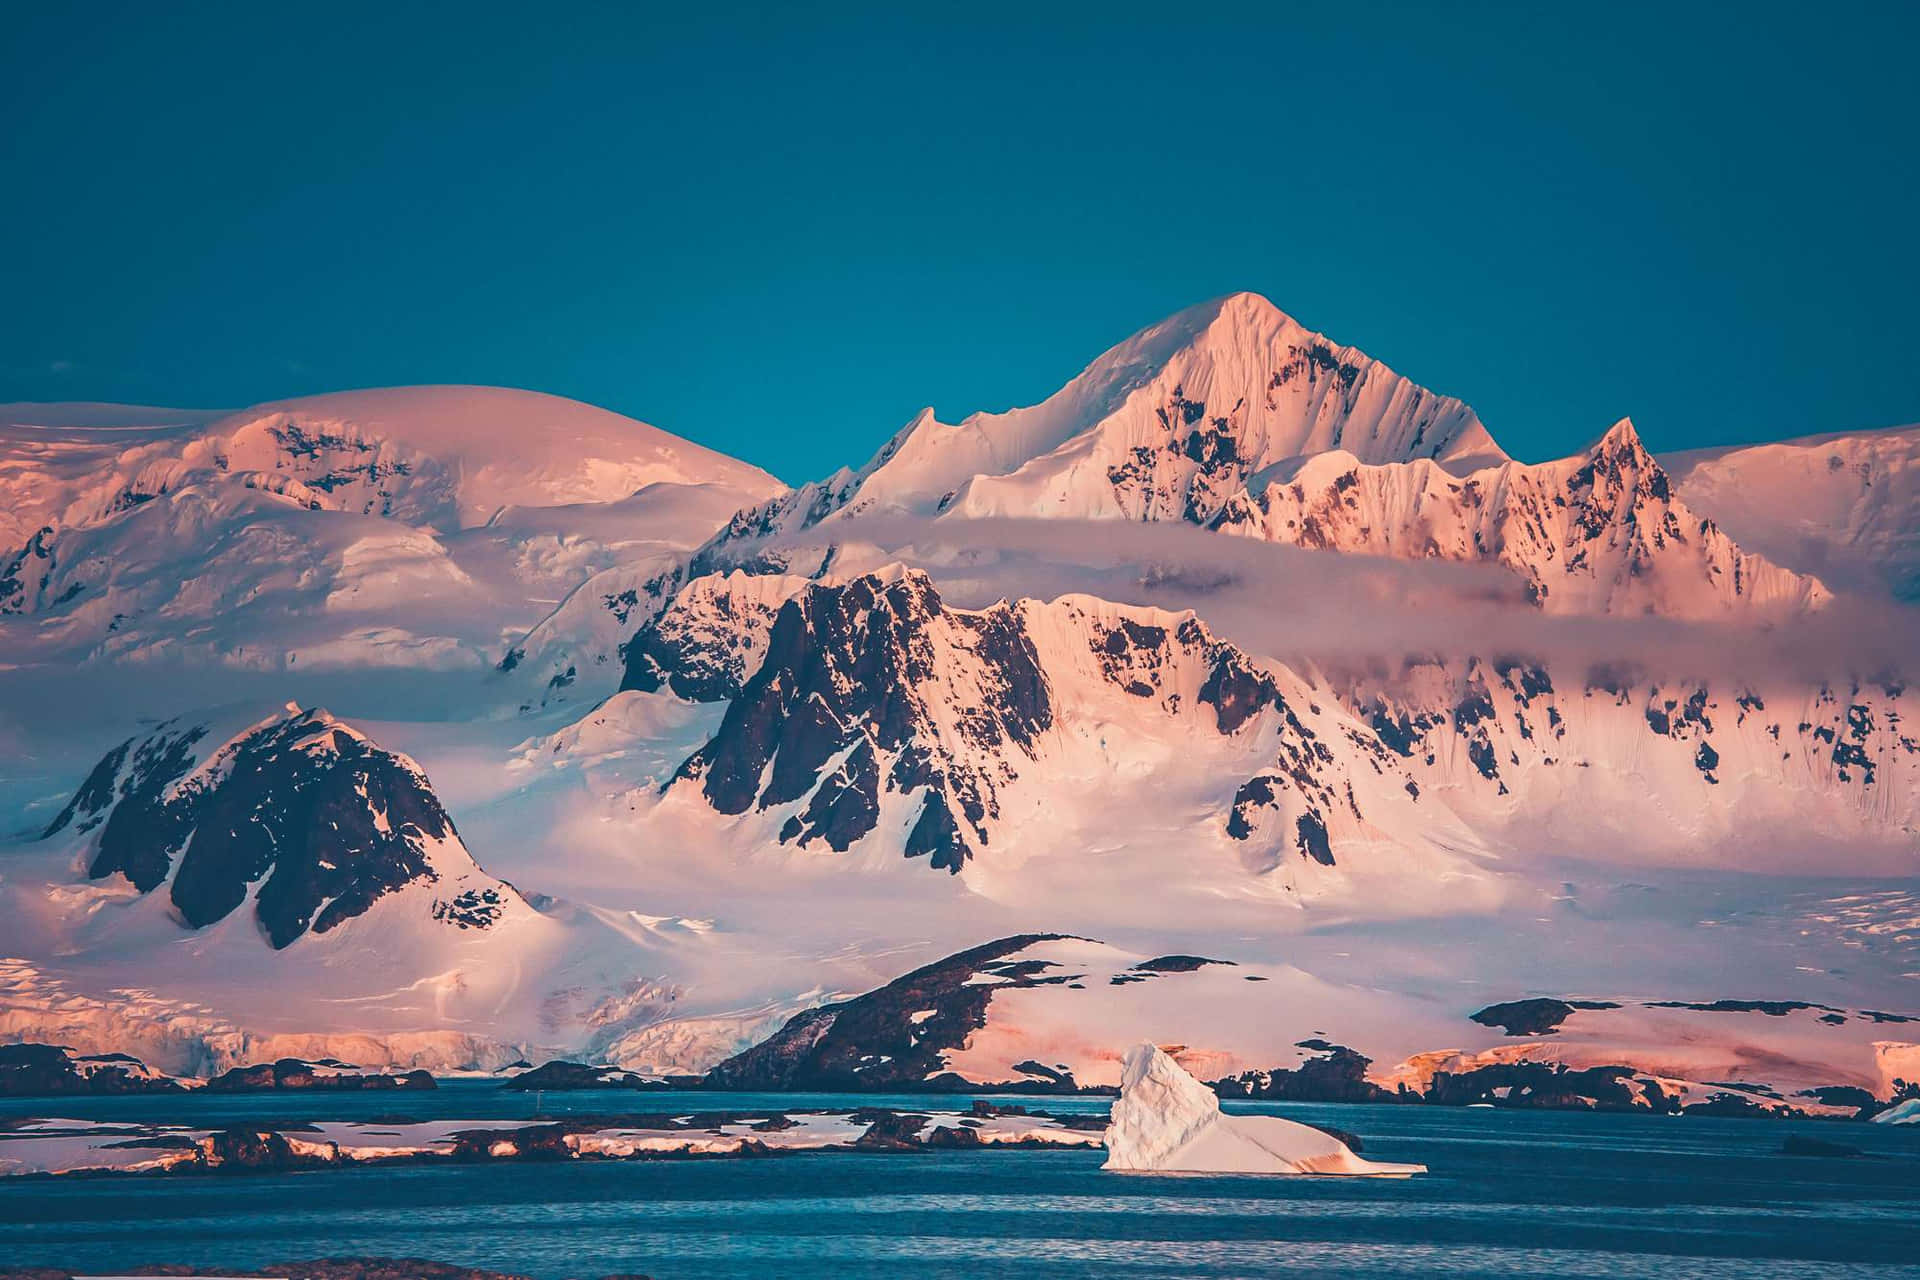 A Mountain Range With Snow And Ice In The Background